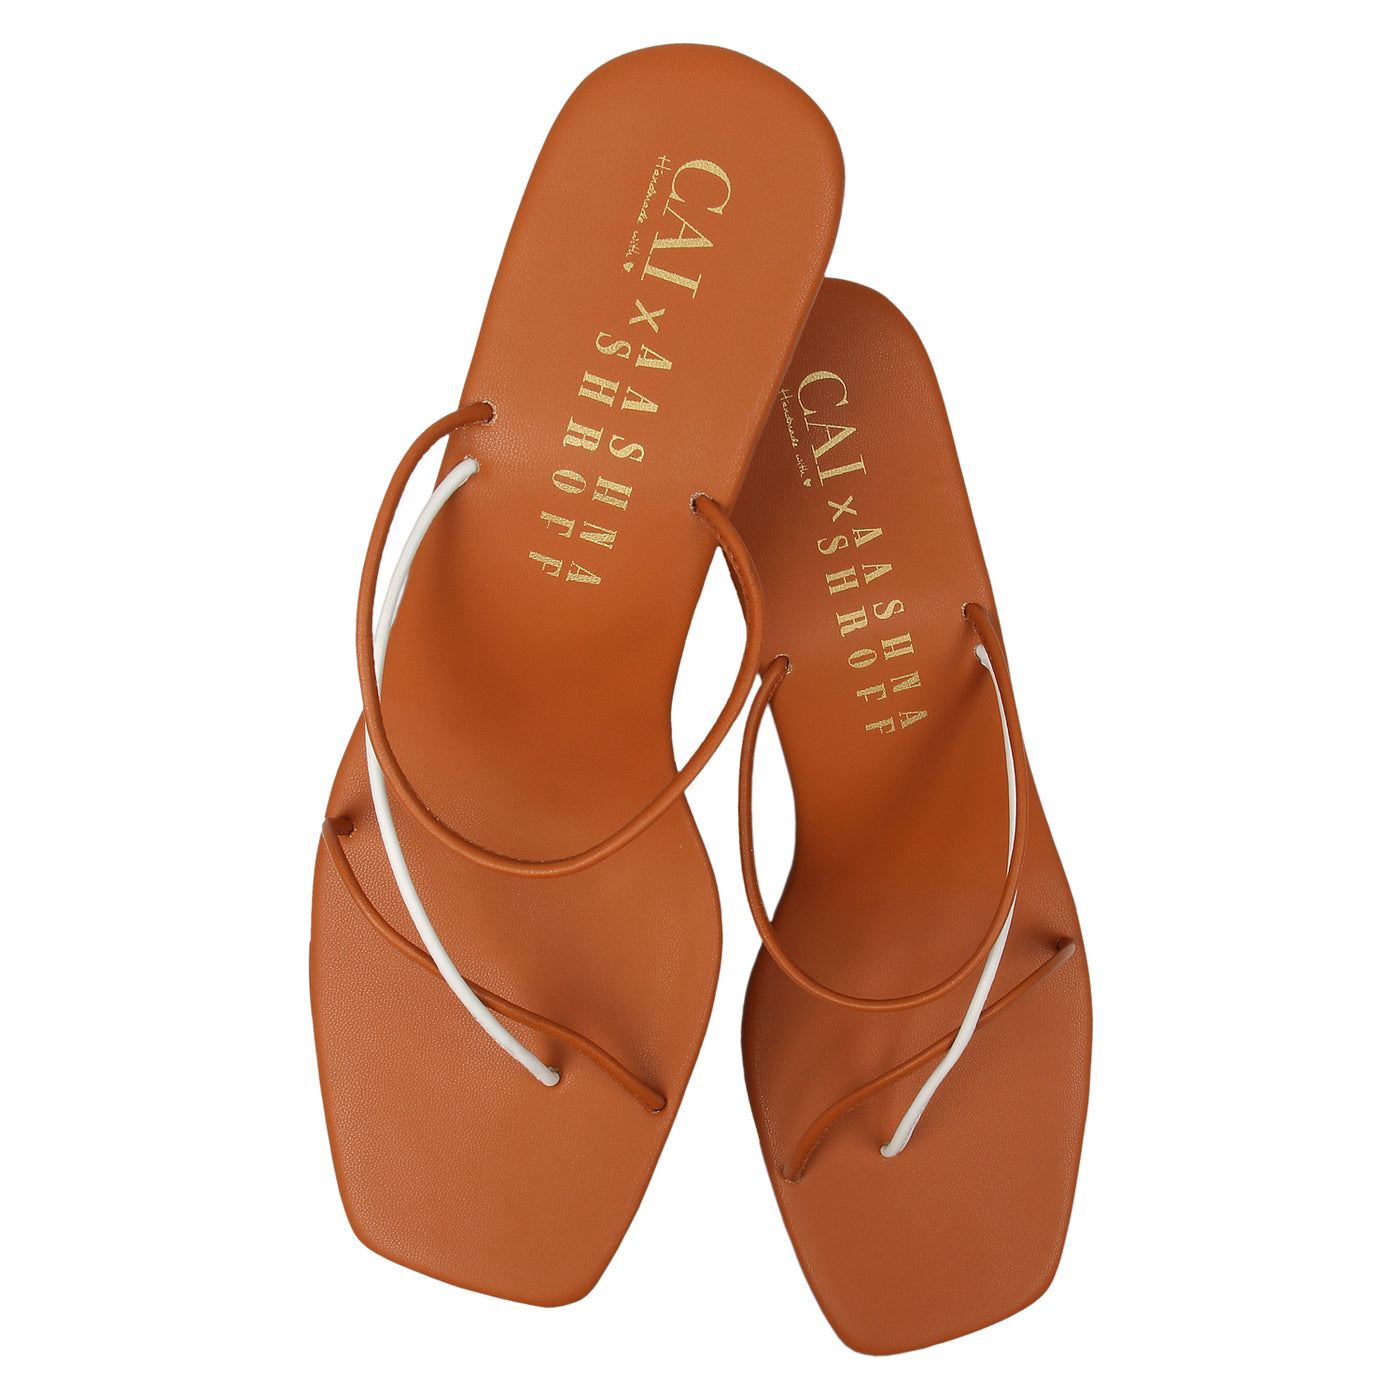 Two Many lines Tan Heels Online in India